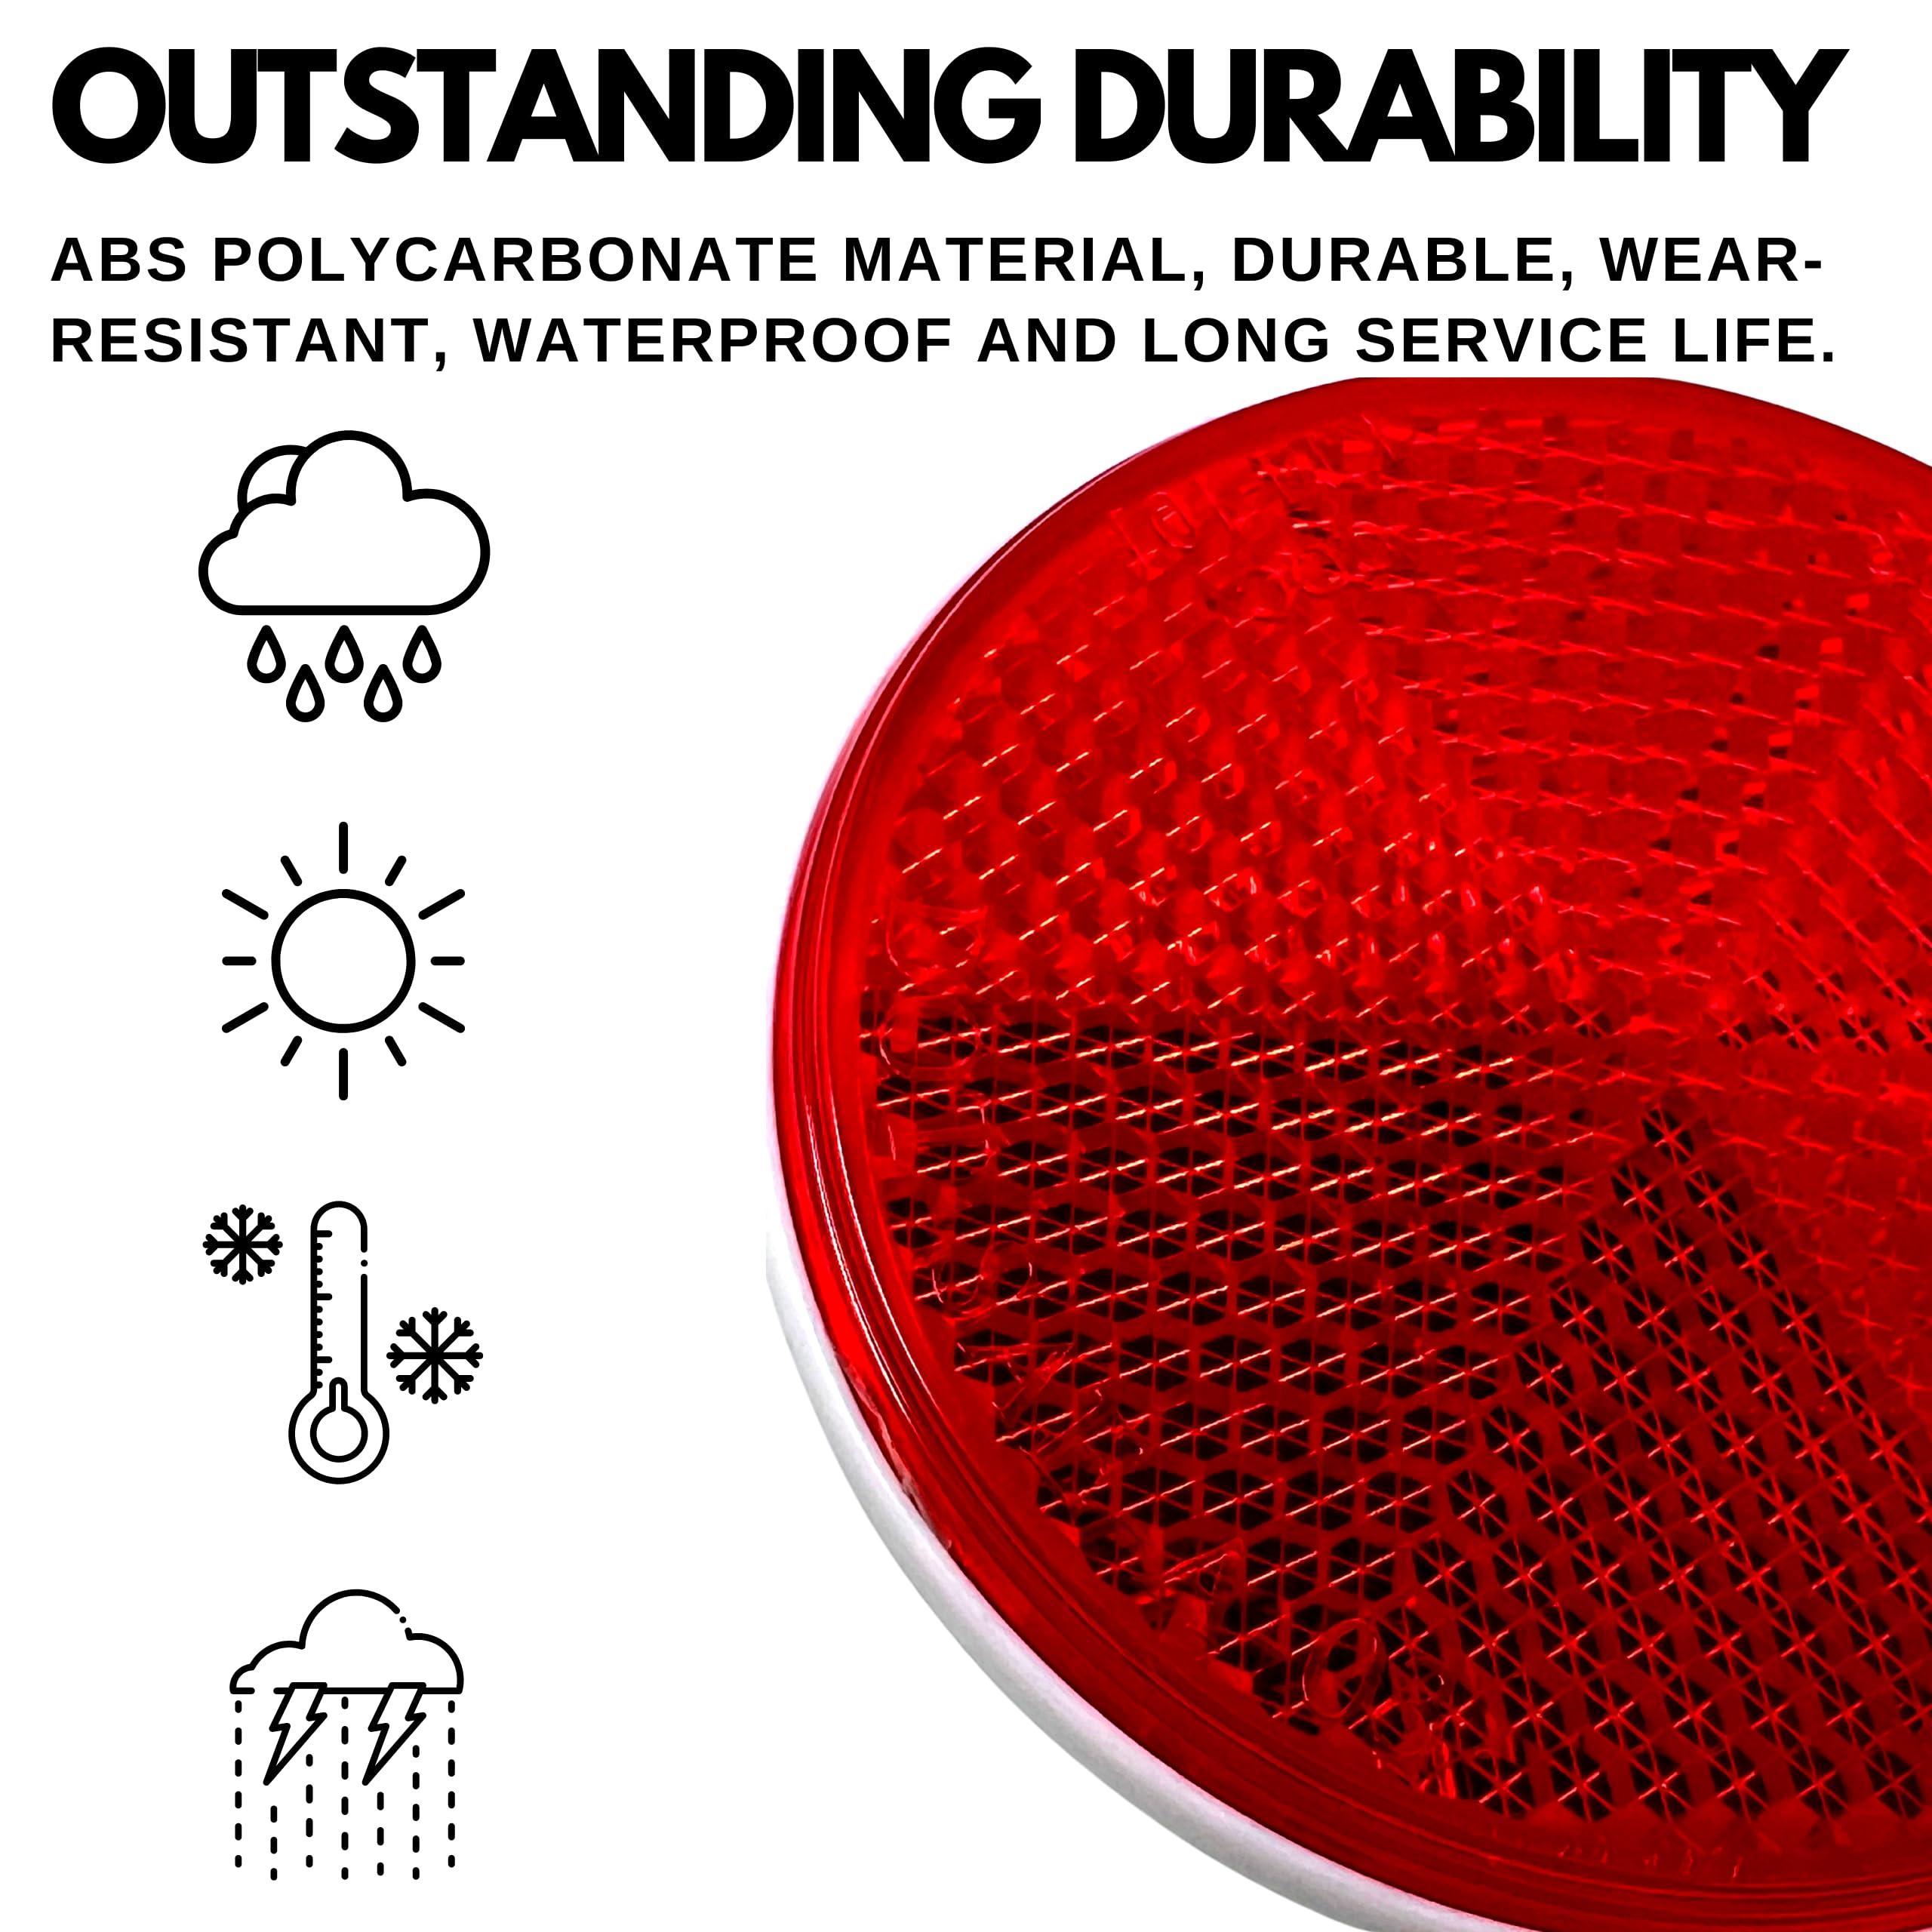 Qty 4 (2 Red/2 Amber) - 2" Inch Round Reflector Bike,Trailer, Truck, Boat, Mailbox, Construction, Signage, Warning with Super Strong Adhesive DOT/SAE Approved